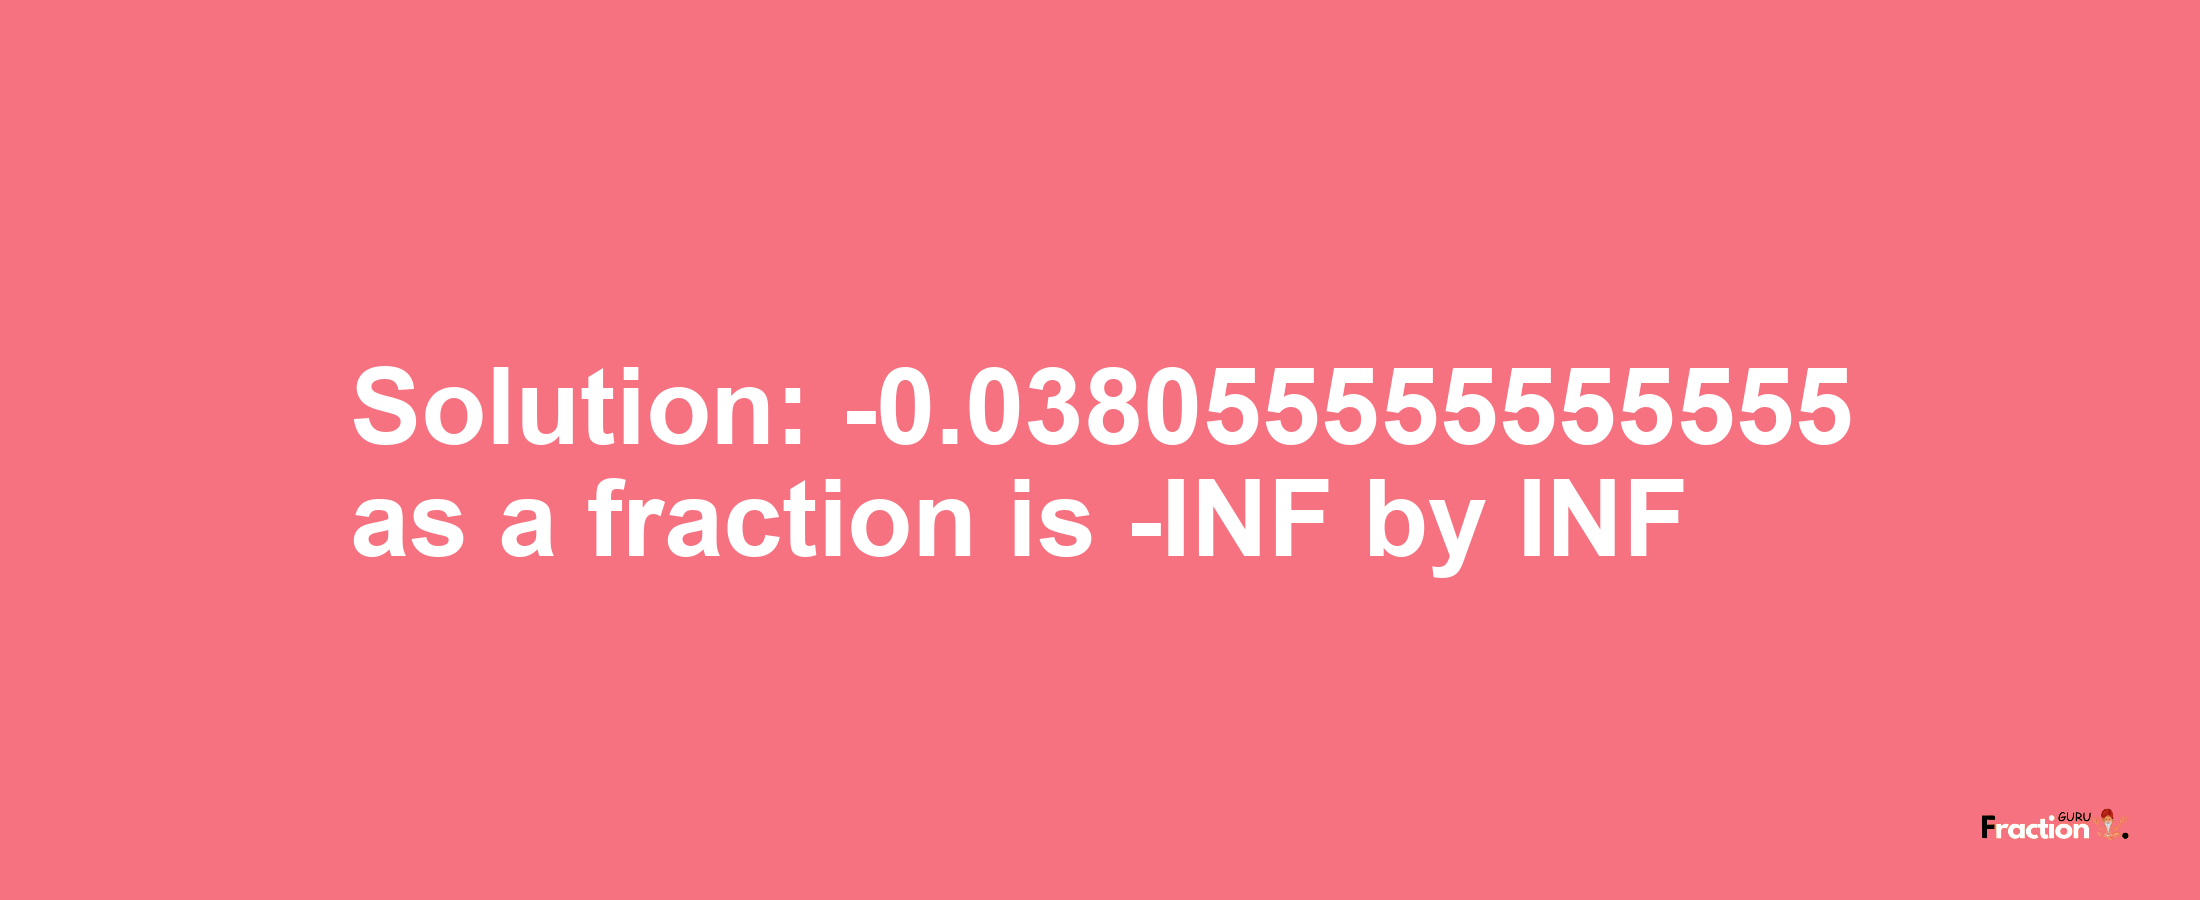 Solution:-0.038055555555555 as a fraction is -INF/INF